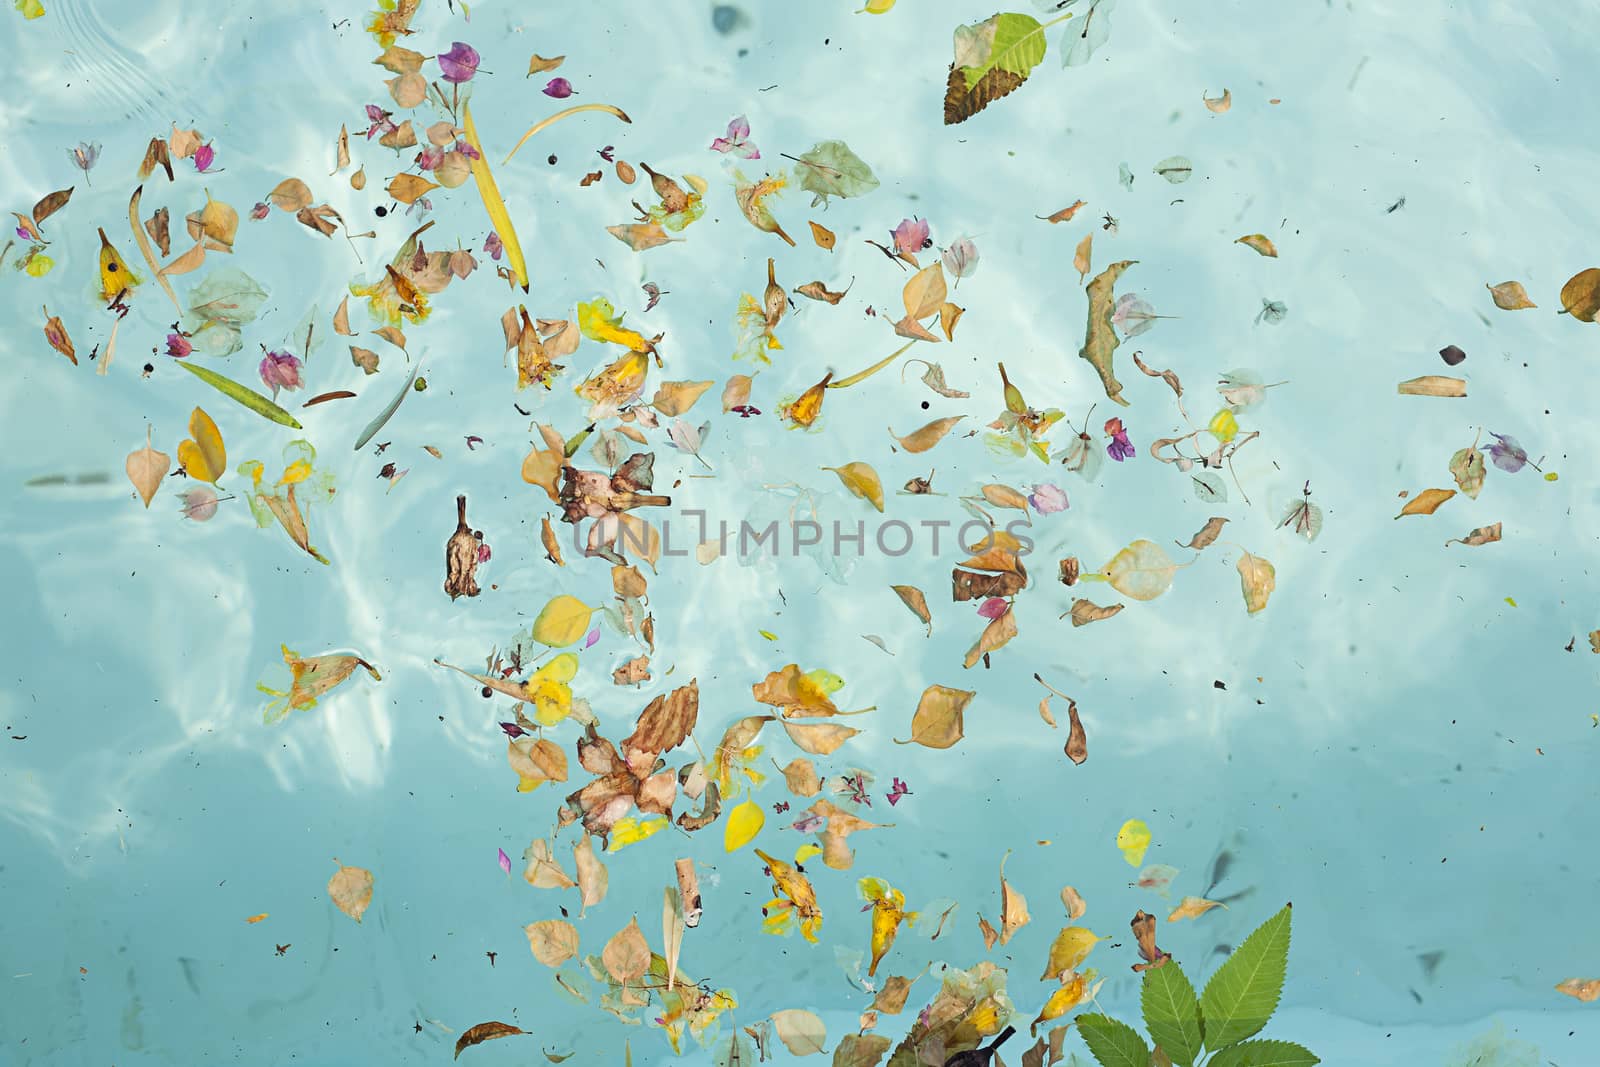 Blue transparent water in the pool with flowers, leaves